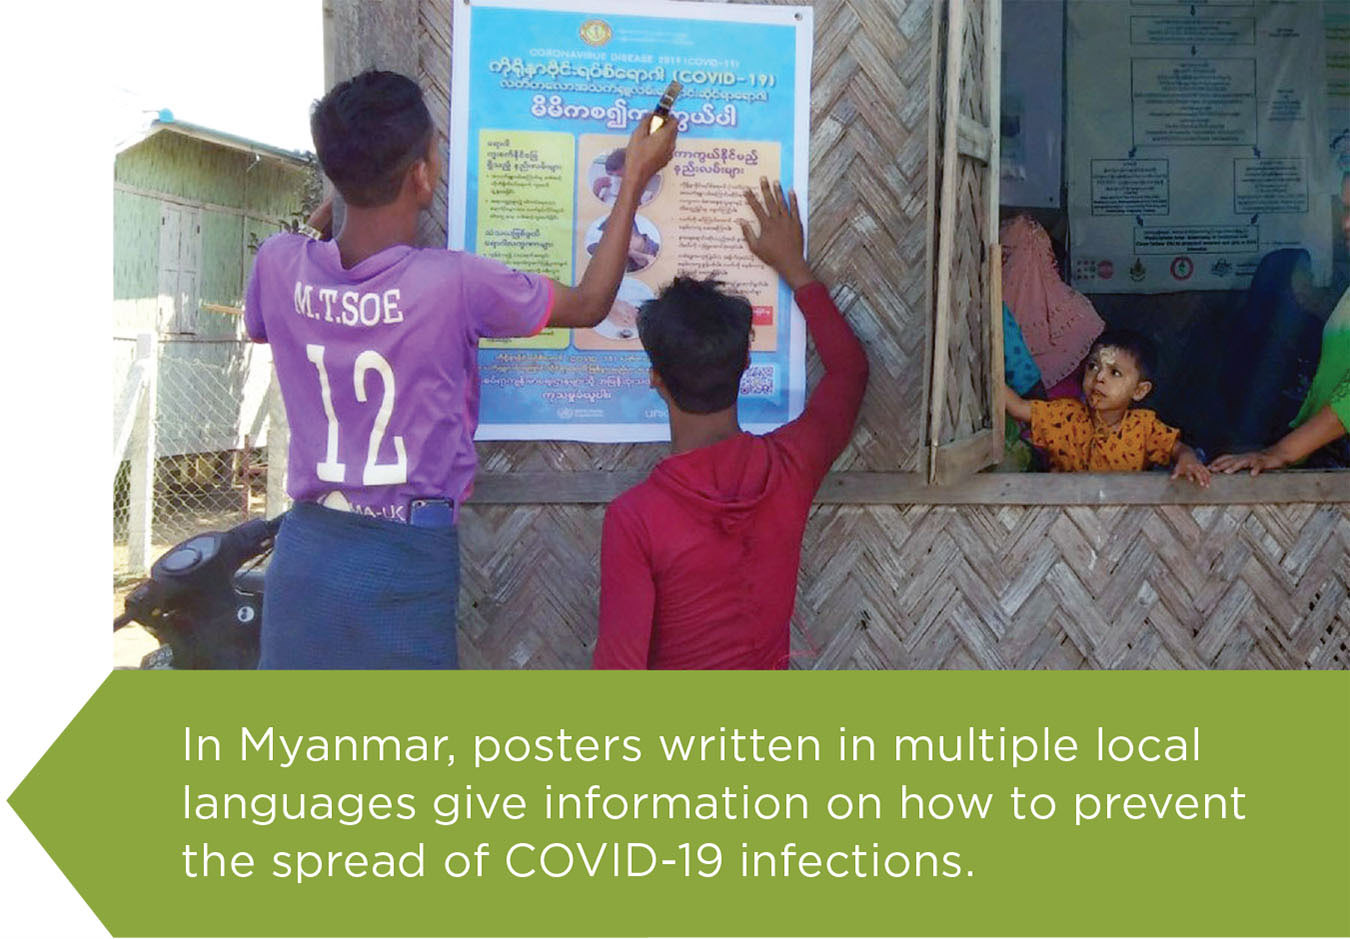 In Myanmar, posters written in multiple local languages give information on how to prevent the spread of COVID-19 infections.